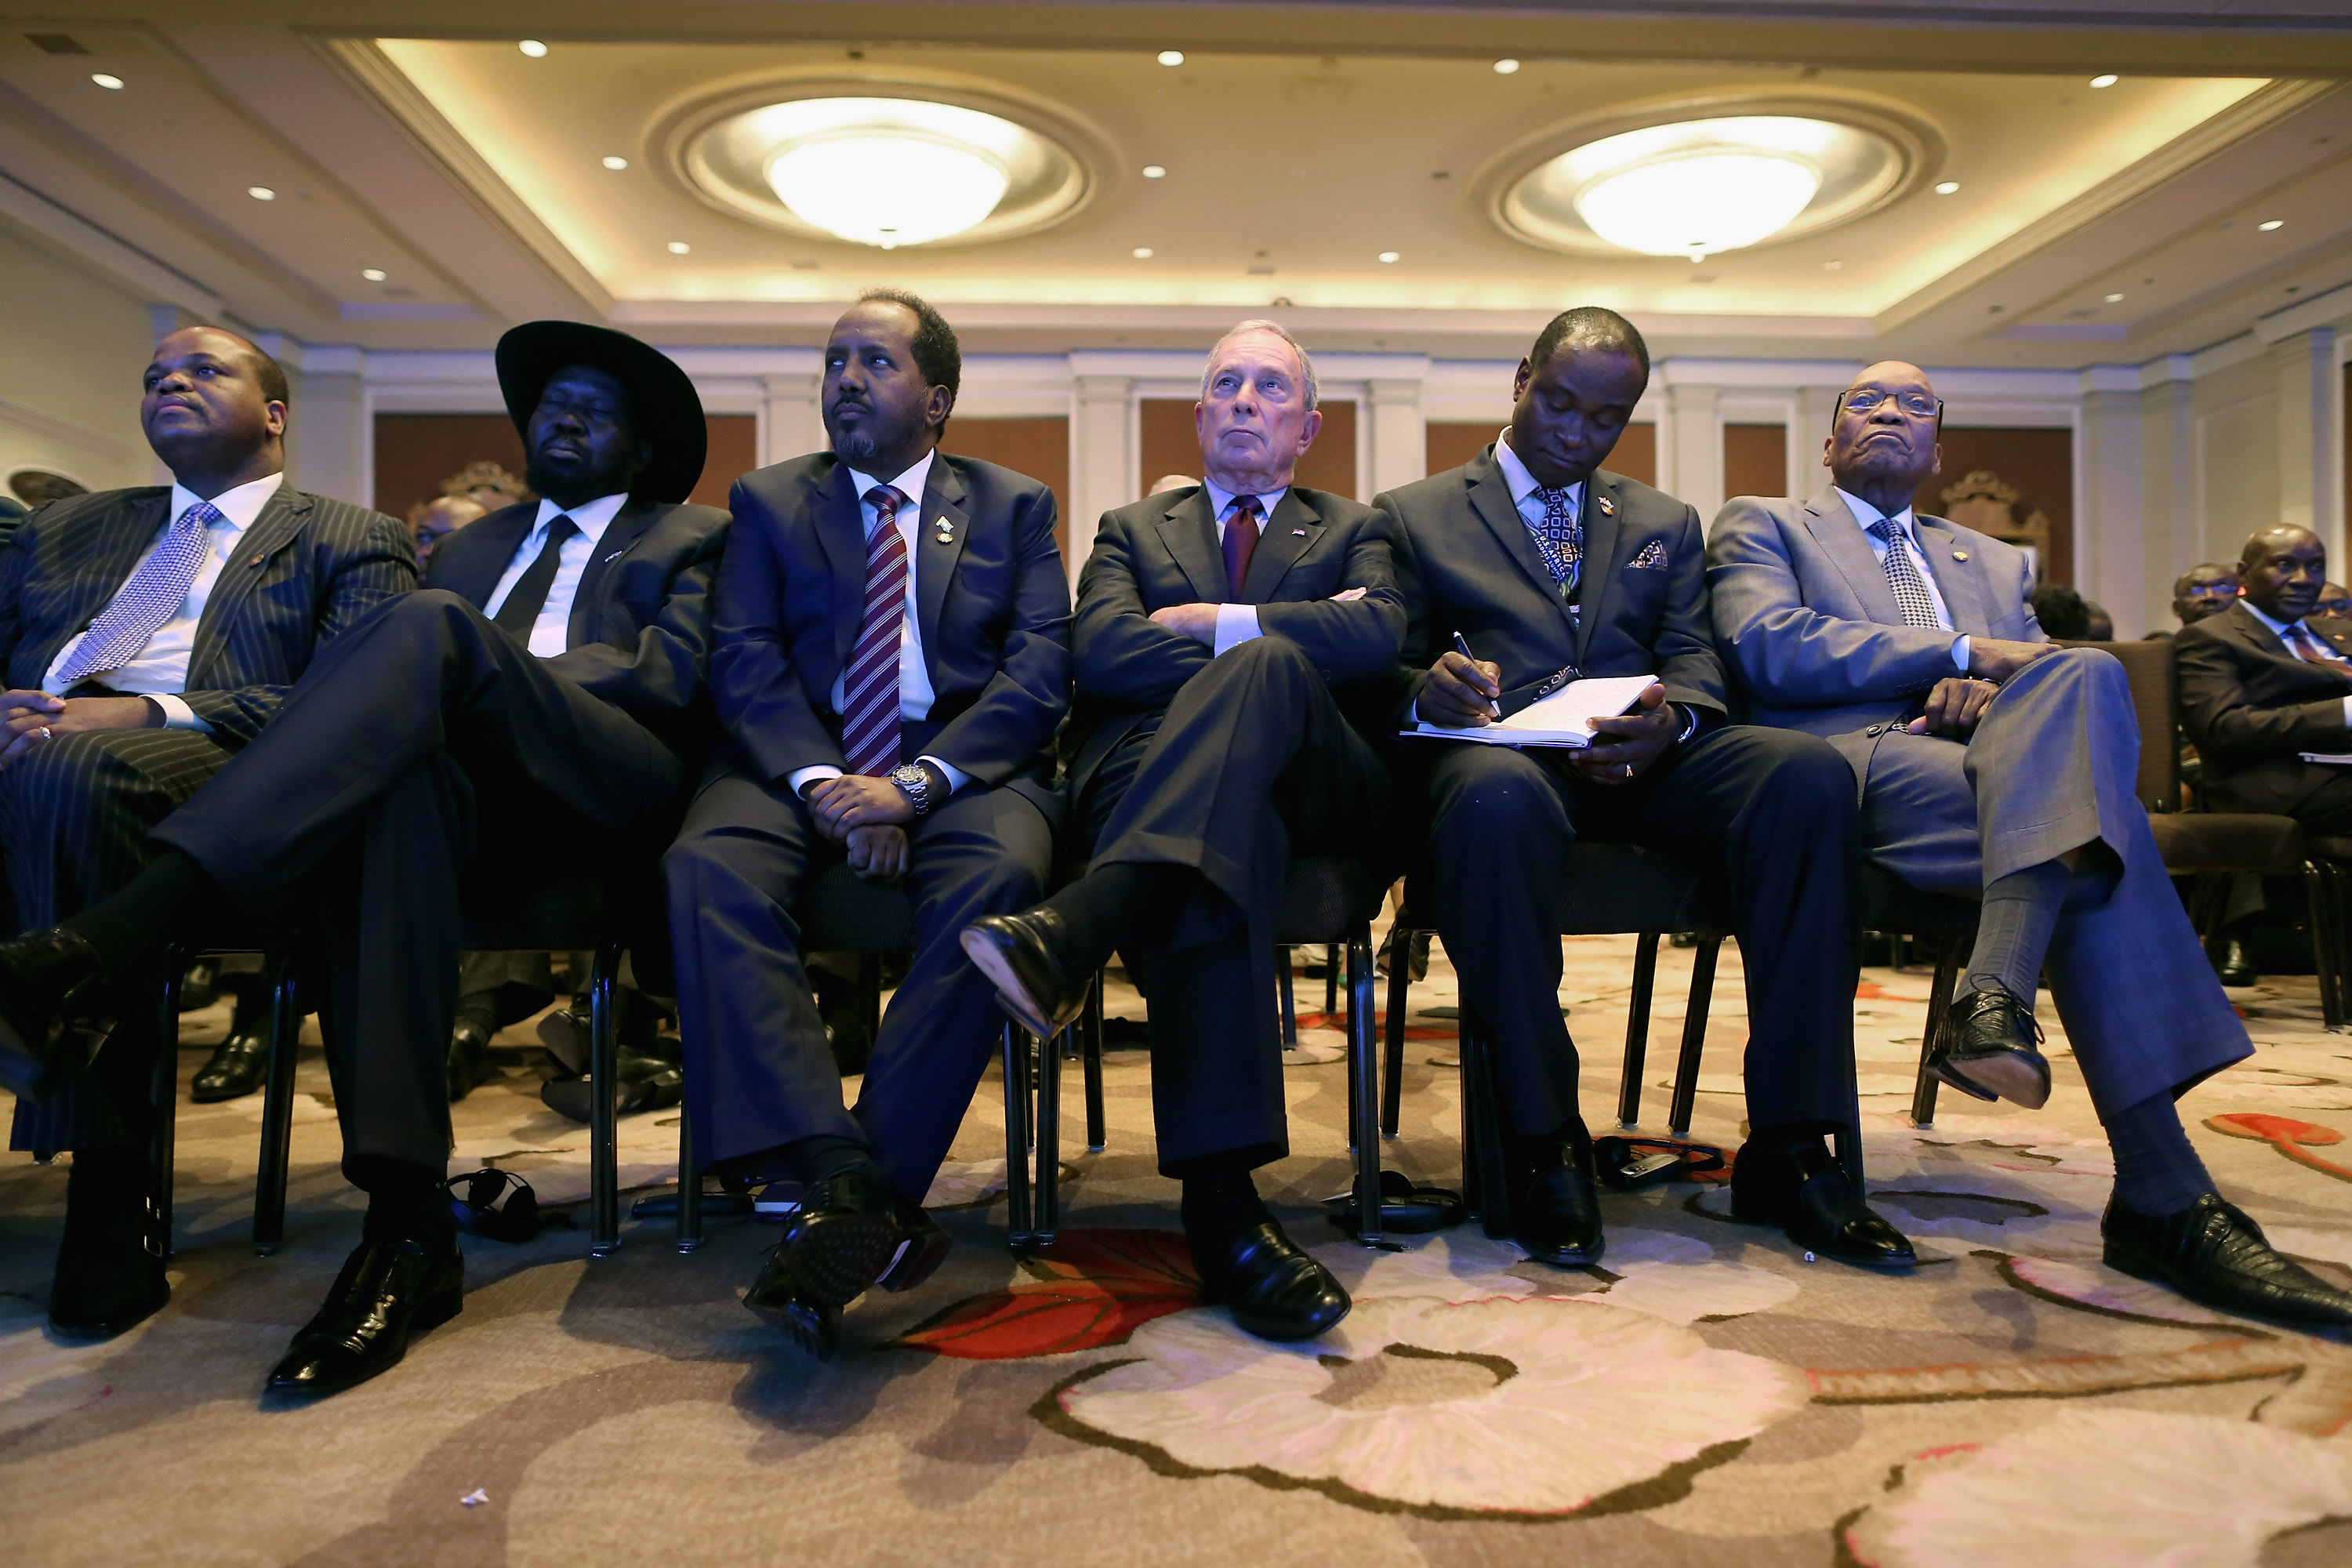 Swaziland King Mswati III, South Sudan President Salva Kiir Mayardit, Djbouti President Ismail Omar Guelleh, Former New York City Mayor Michael Bloomberg, South Africa President Jacob Zuma, left to right, and other African leaders listen to U.S. President Barack Obama deliver closing remarks during the U.S.-Africa Business Forum at the Mandarin Oriental Hotel August 5, 2014 in Washington, DC. (Chip Somodevilla—Getty Images)